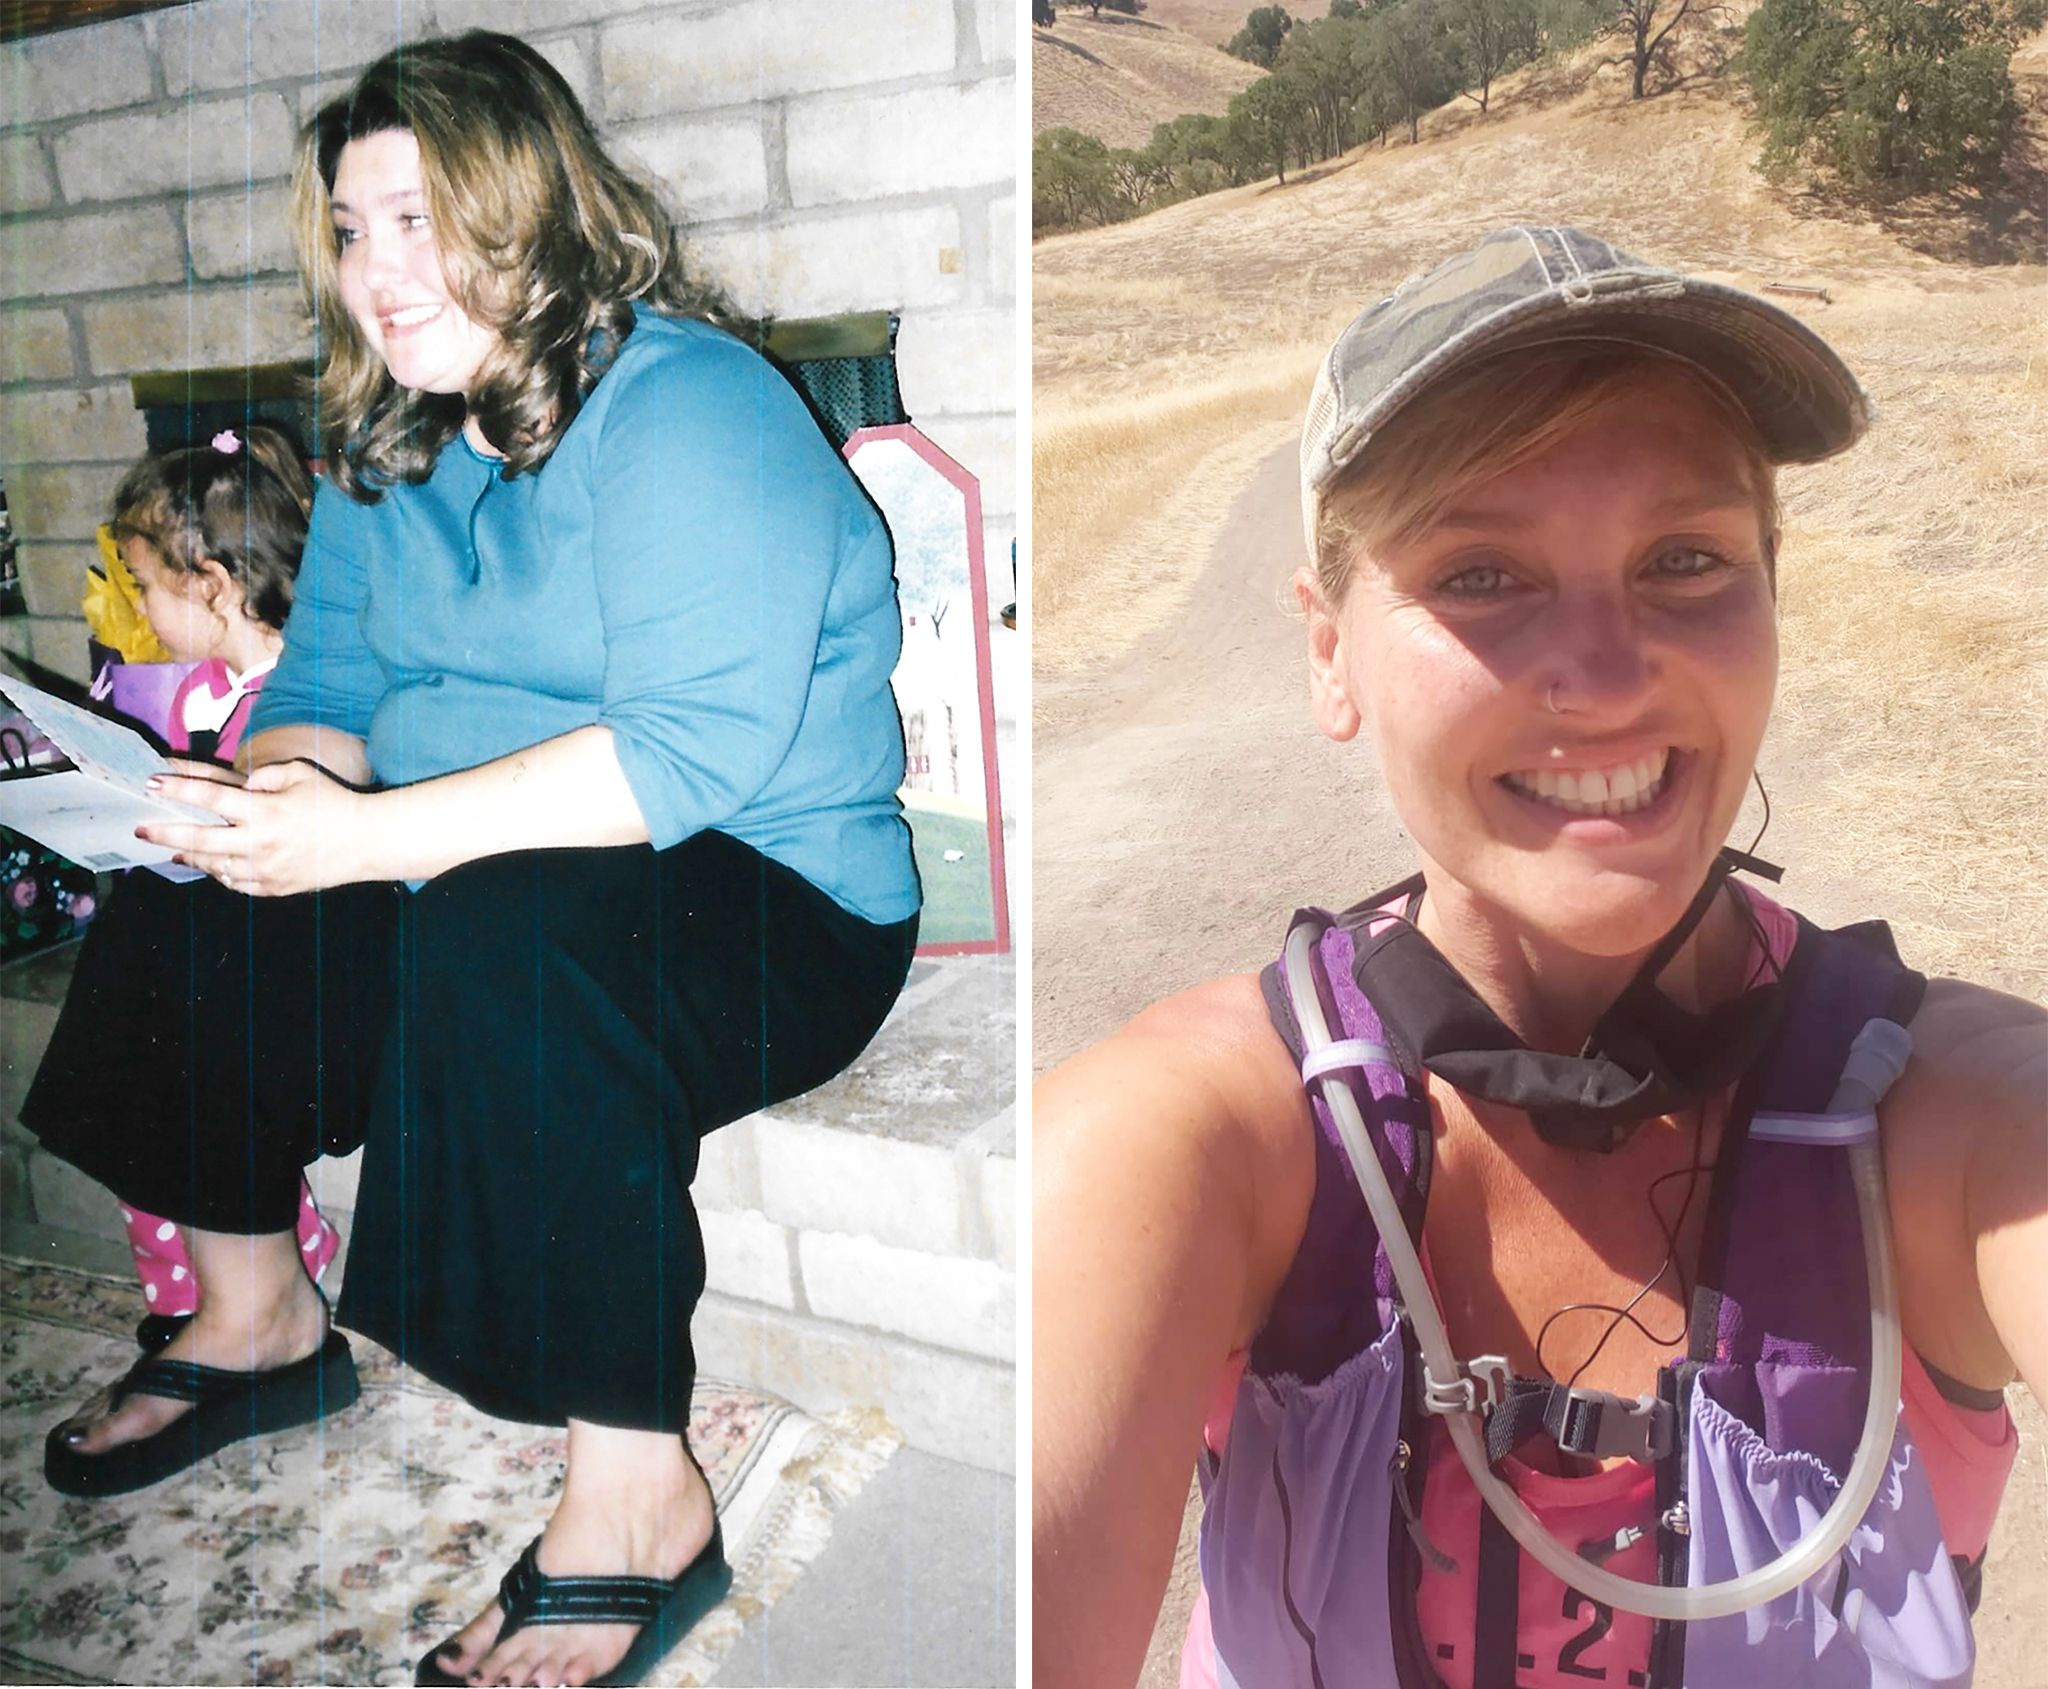 Her First Diet was at Age 7. Decades Later, She Embraced Running and Lost 125 Pounds